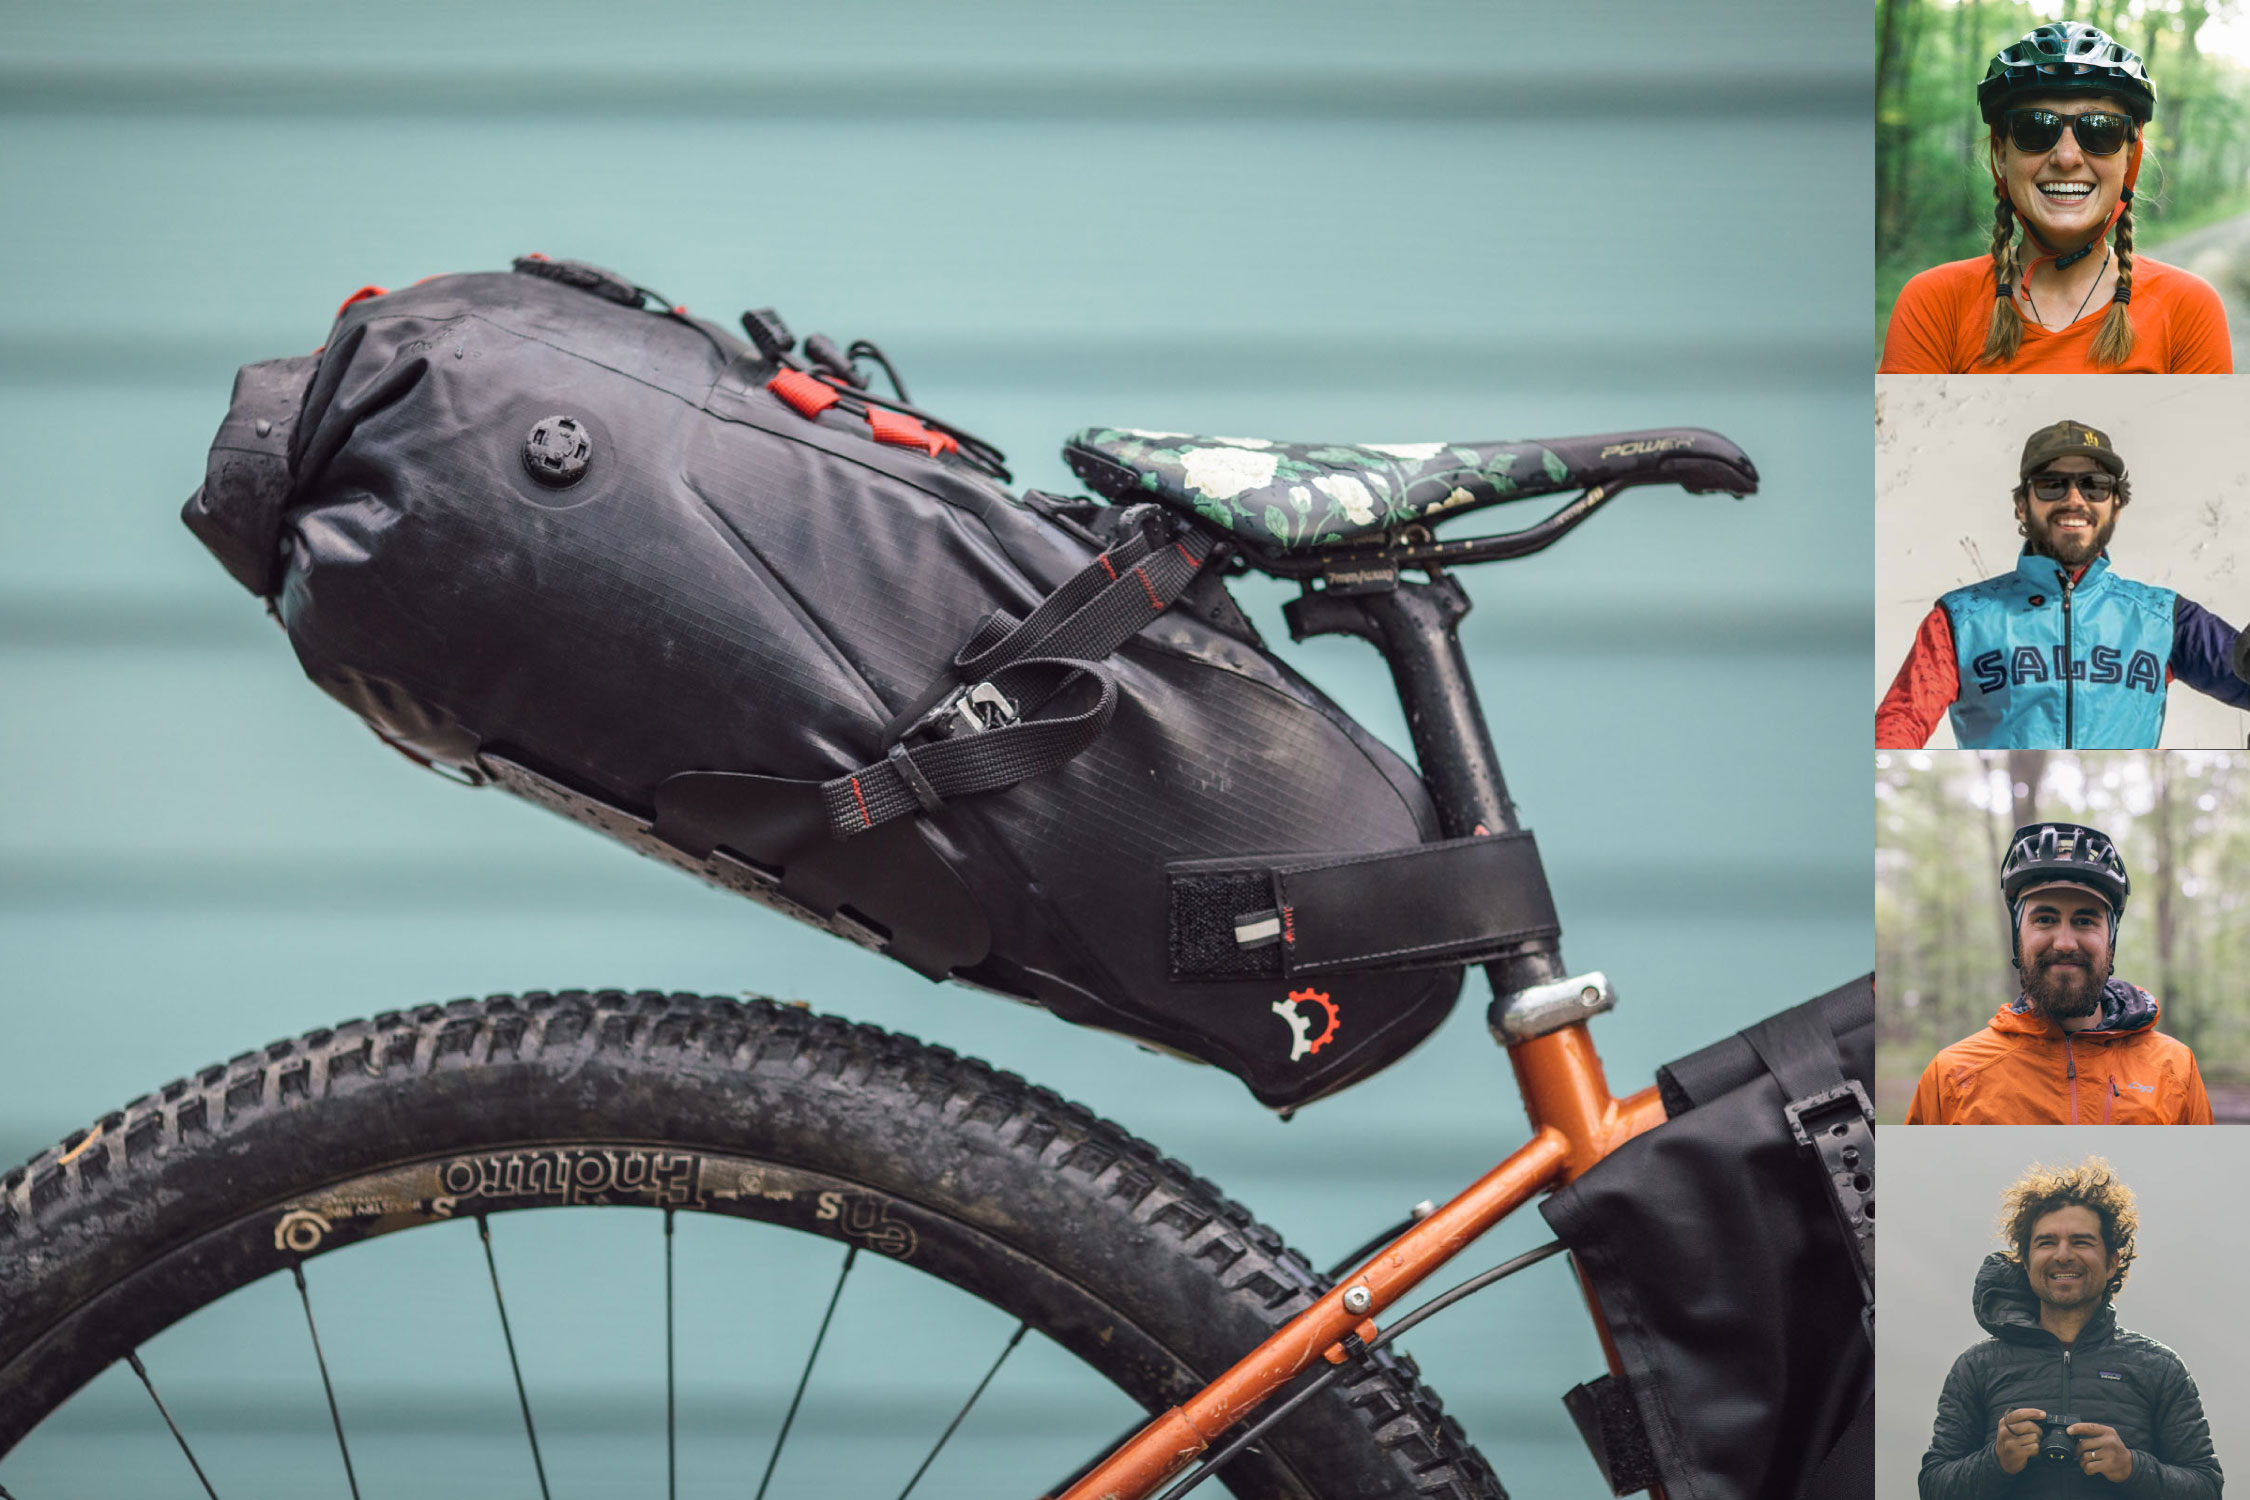 What's in your bikepacking bag video